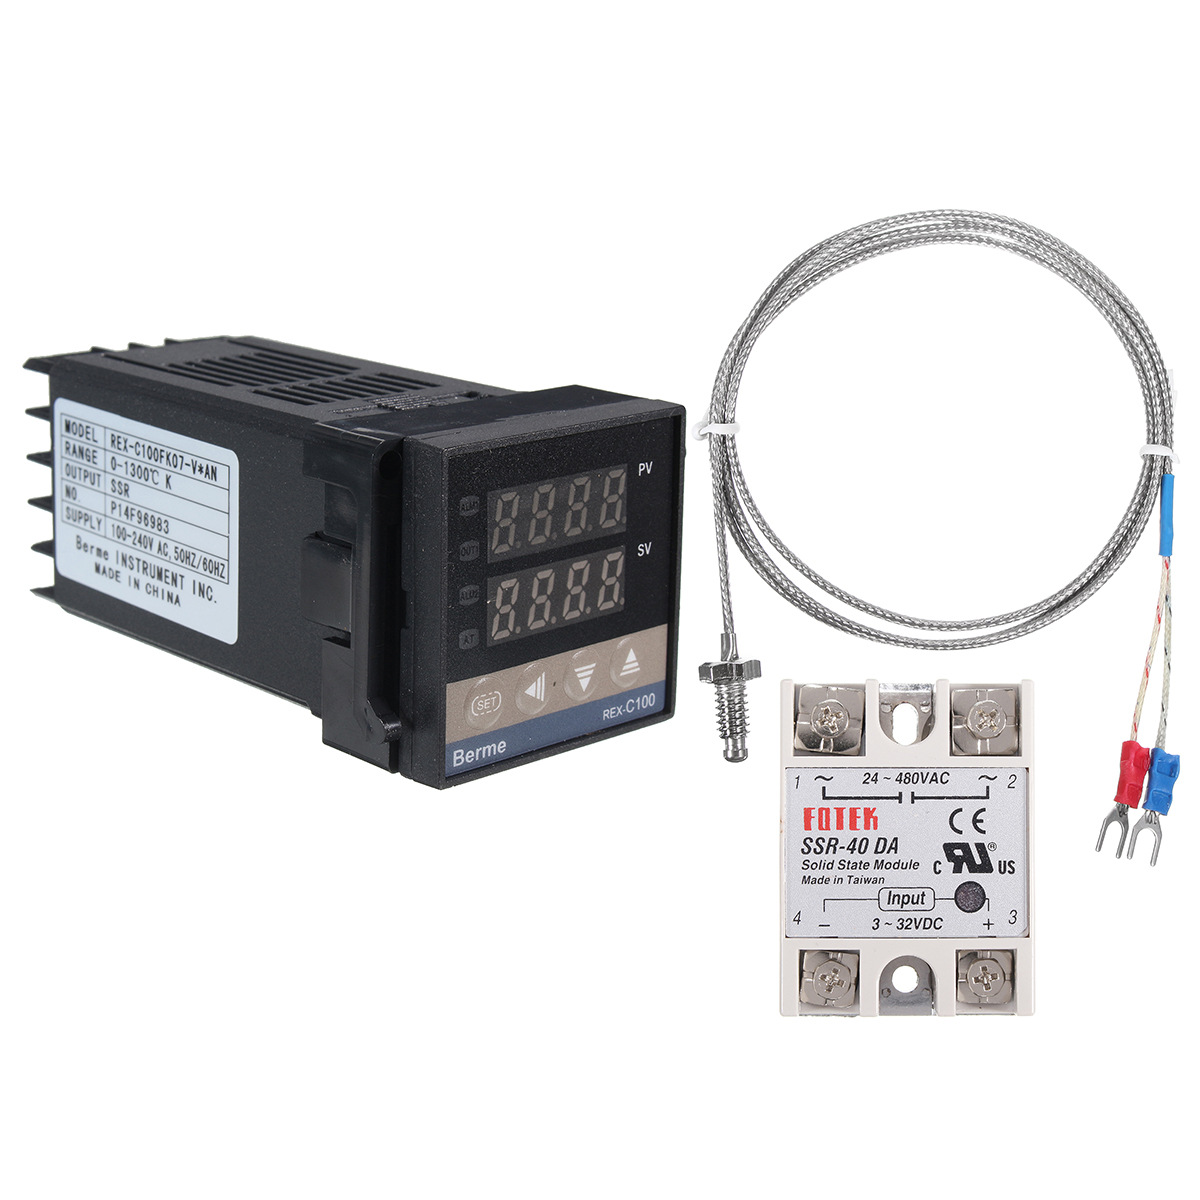 110-240V-01300-REX-C100-Digital-PID-Temperature-Controller-Kit-Alarm-Function-With-Probe-Relay-1351235-7